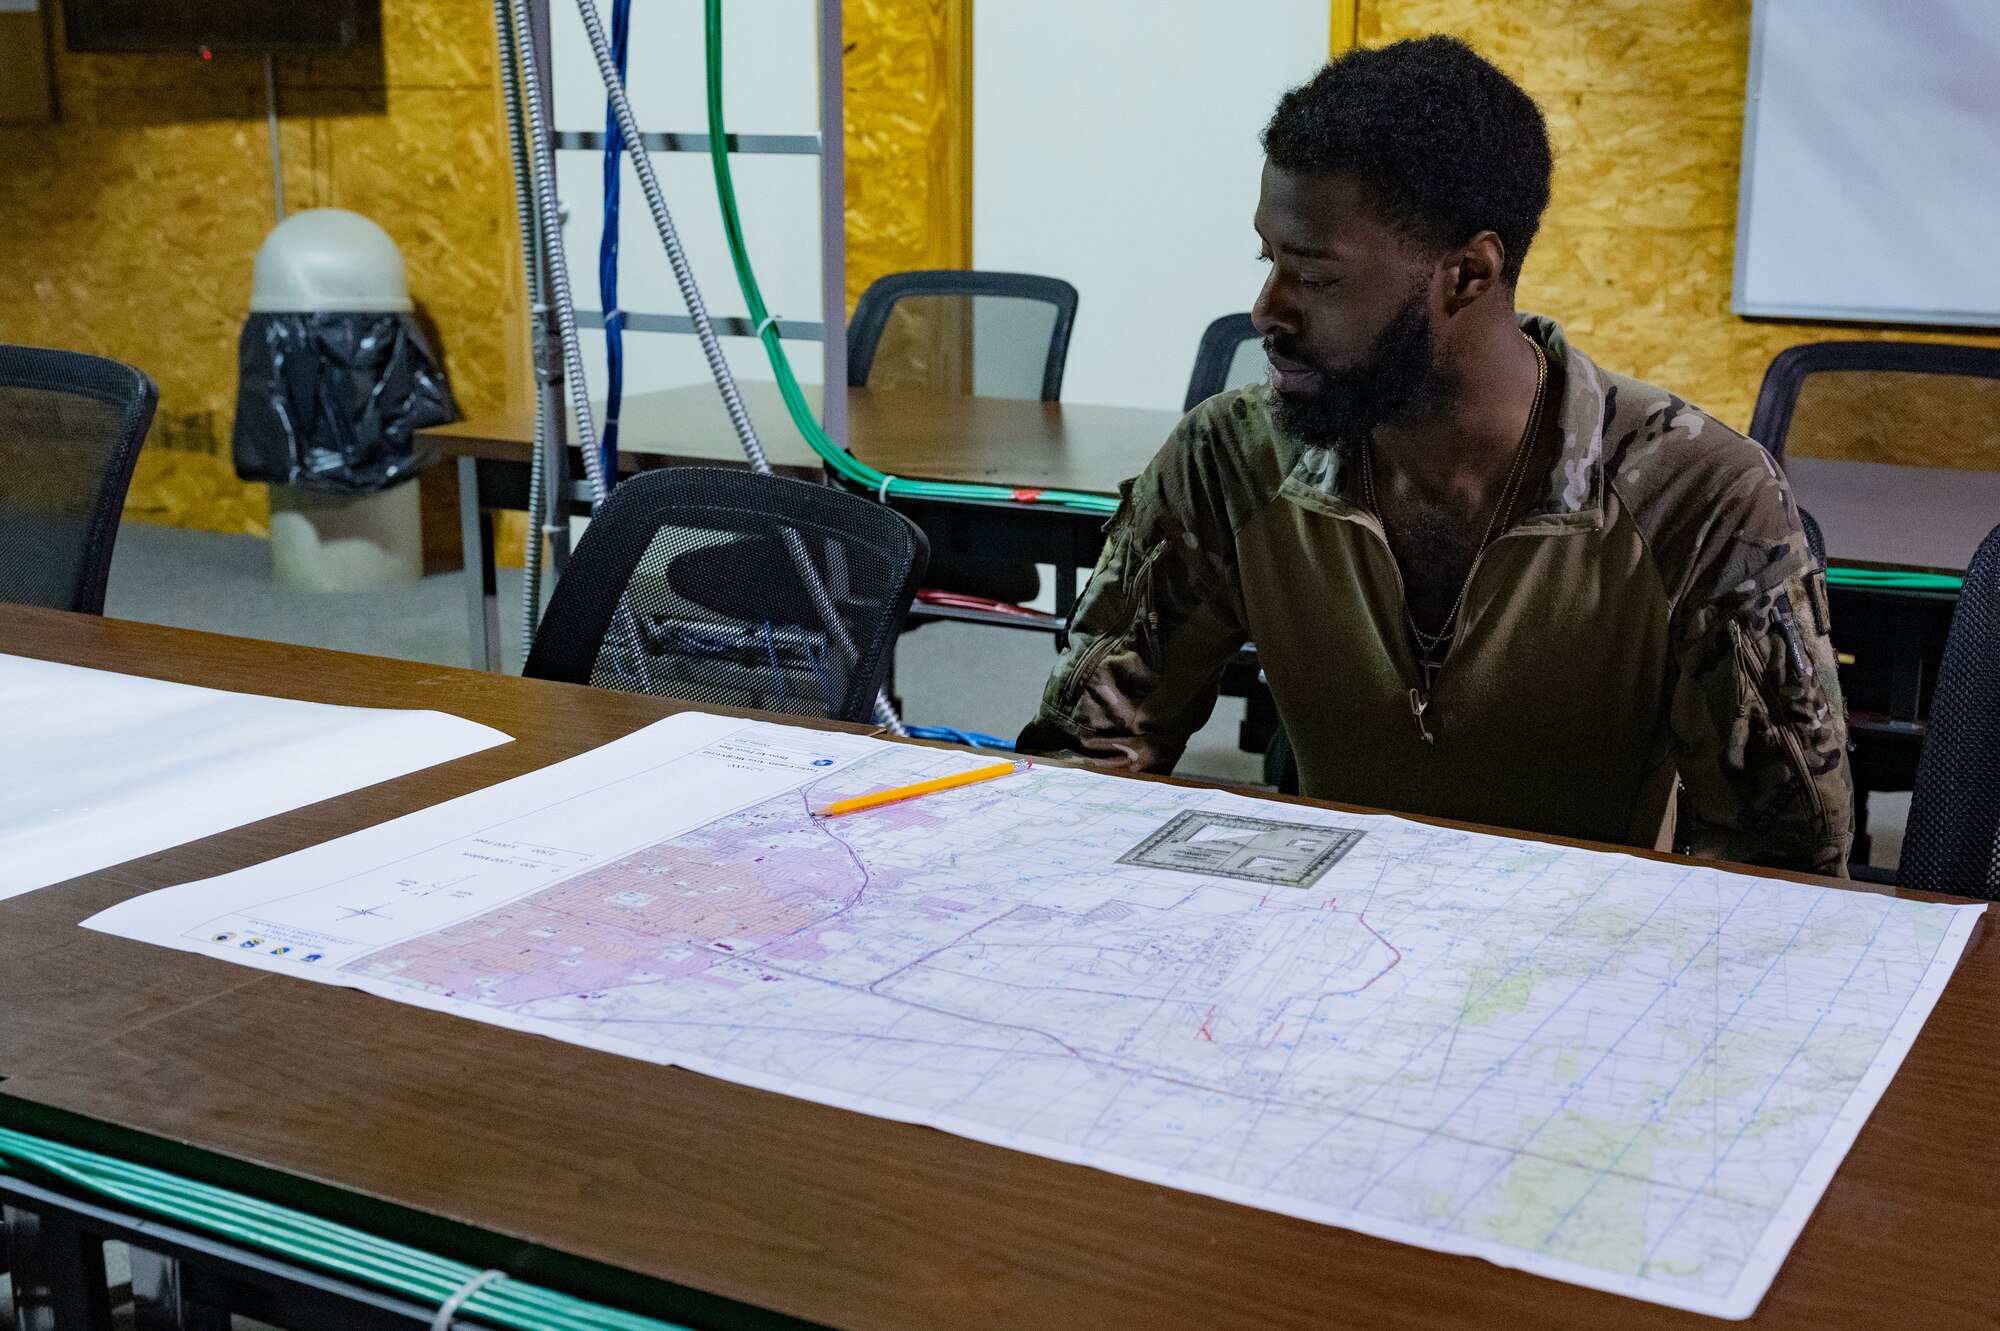 U.S. Air Force Senior Airman Jermaine Williams, 7th Security Forces Squadron defender, analyzes a map during the map reading section of the Expert Defender competition at Dyess Air Force Base, Texas, Oct. 25, 2023. The competition tested the defenders’ weapons proficiency, physical fitness and radio procedures. (U.S. Air Force photo by Airman 1st Class Alondra Cristobal Hernandez)